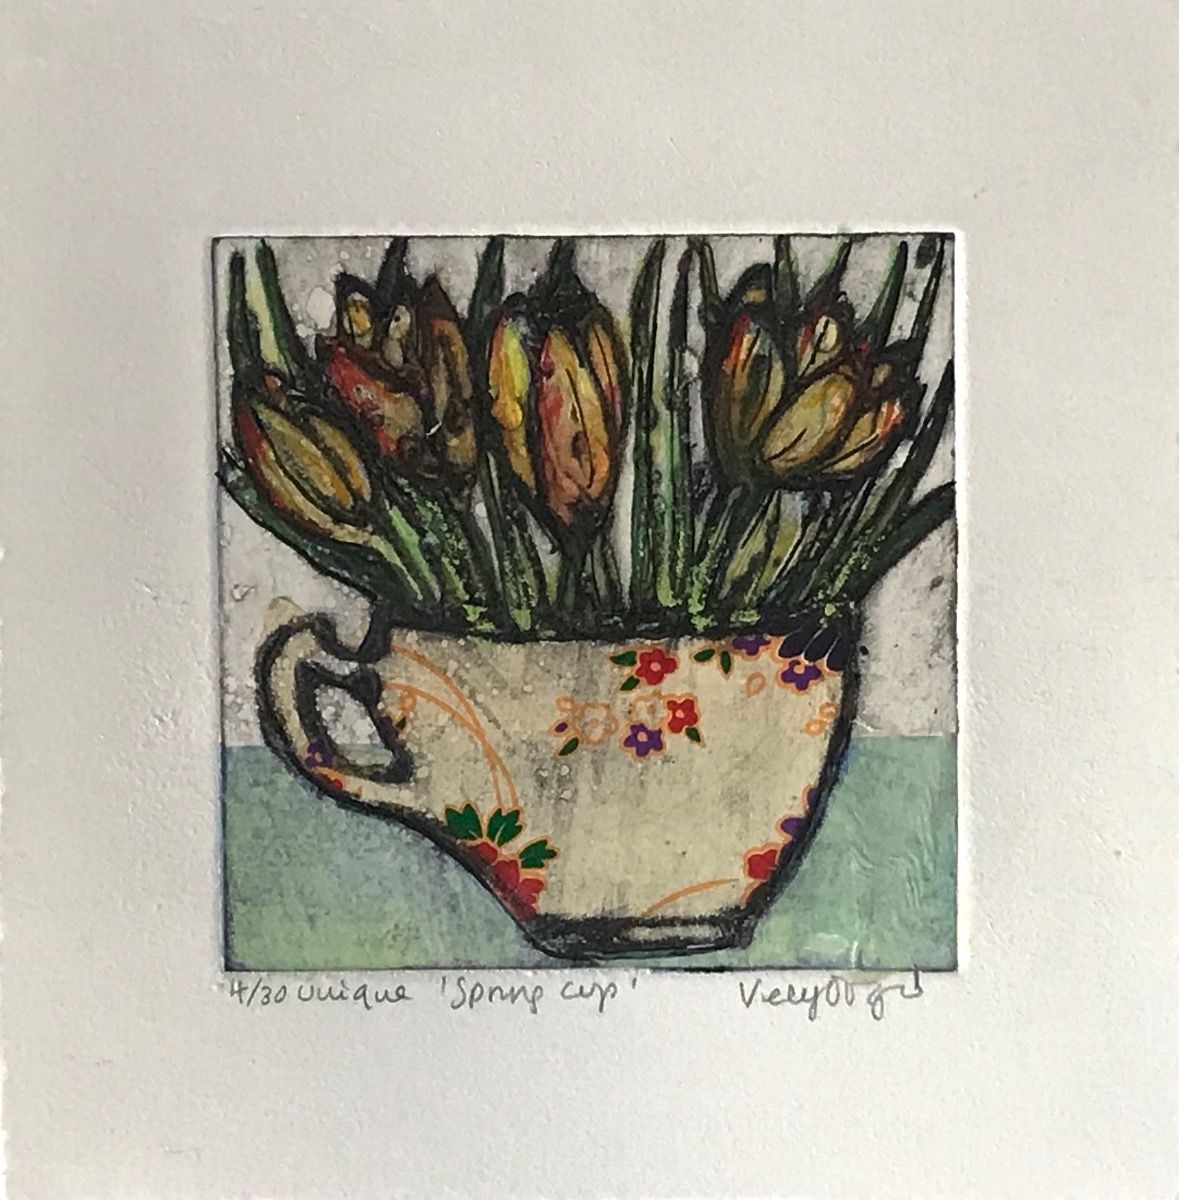 Spring Cup by Vicky Oldfield